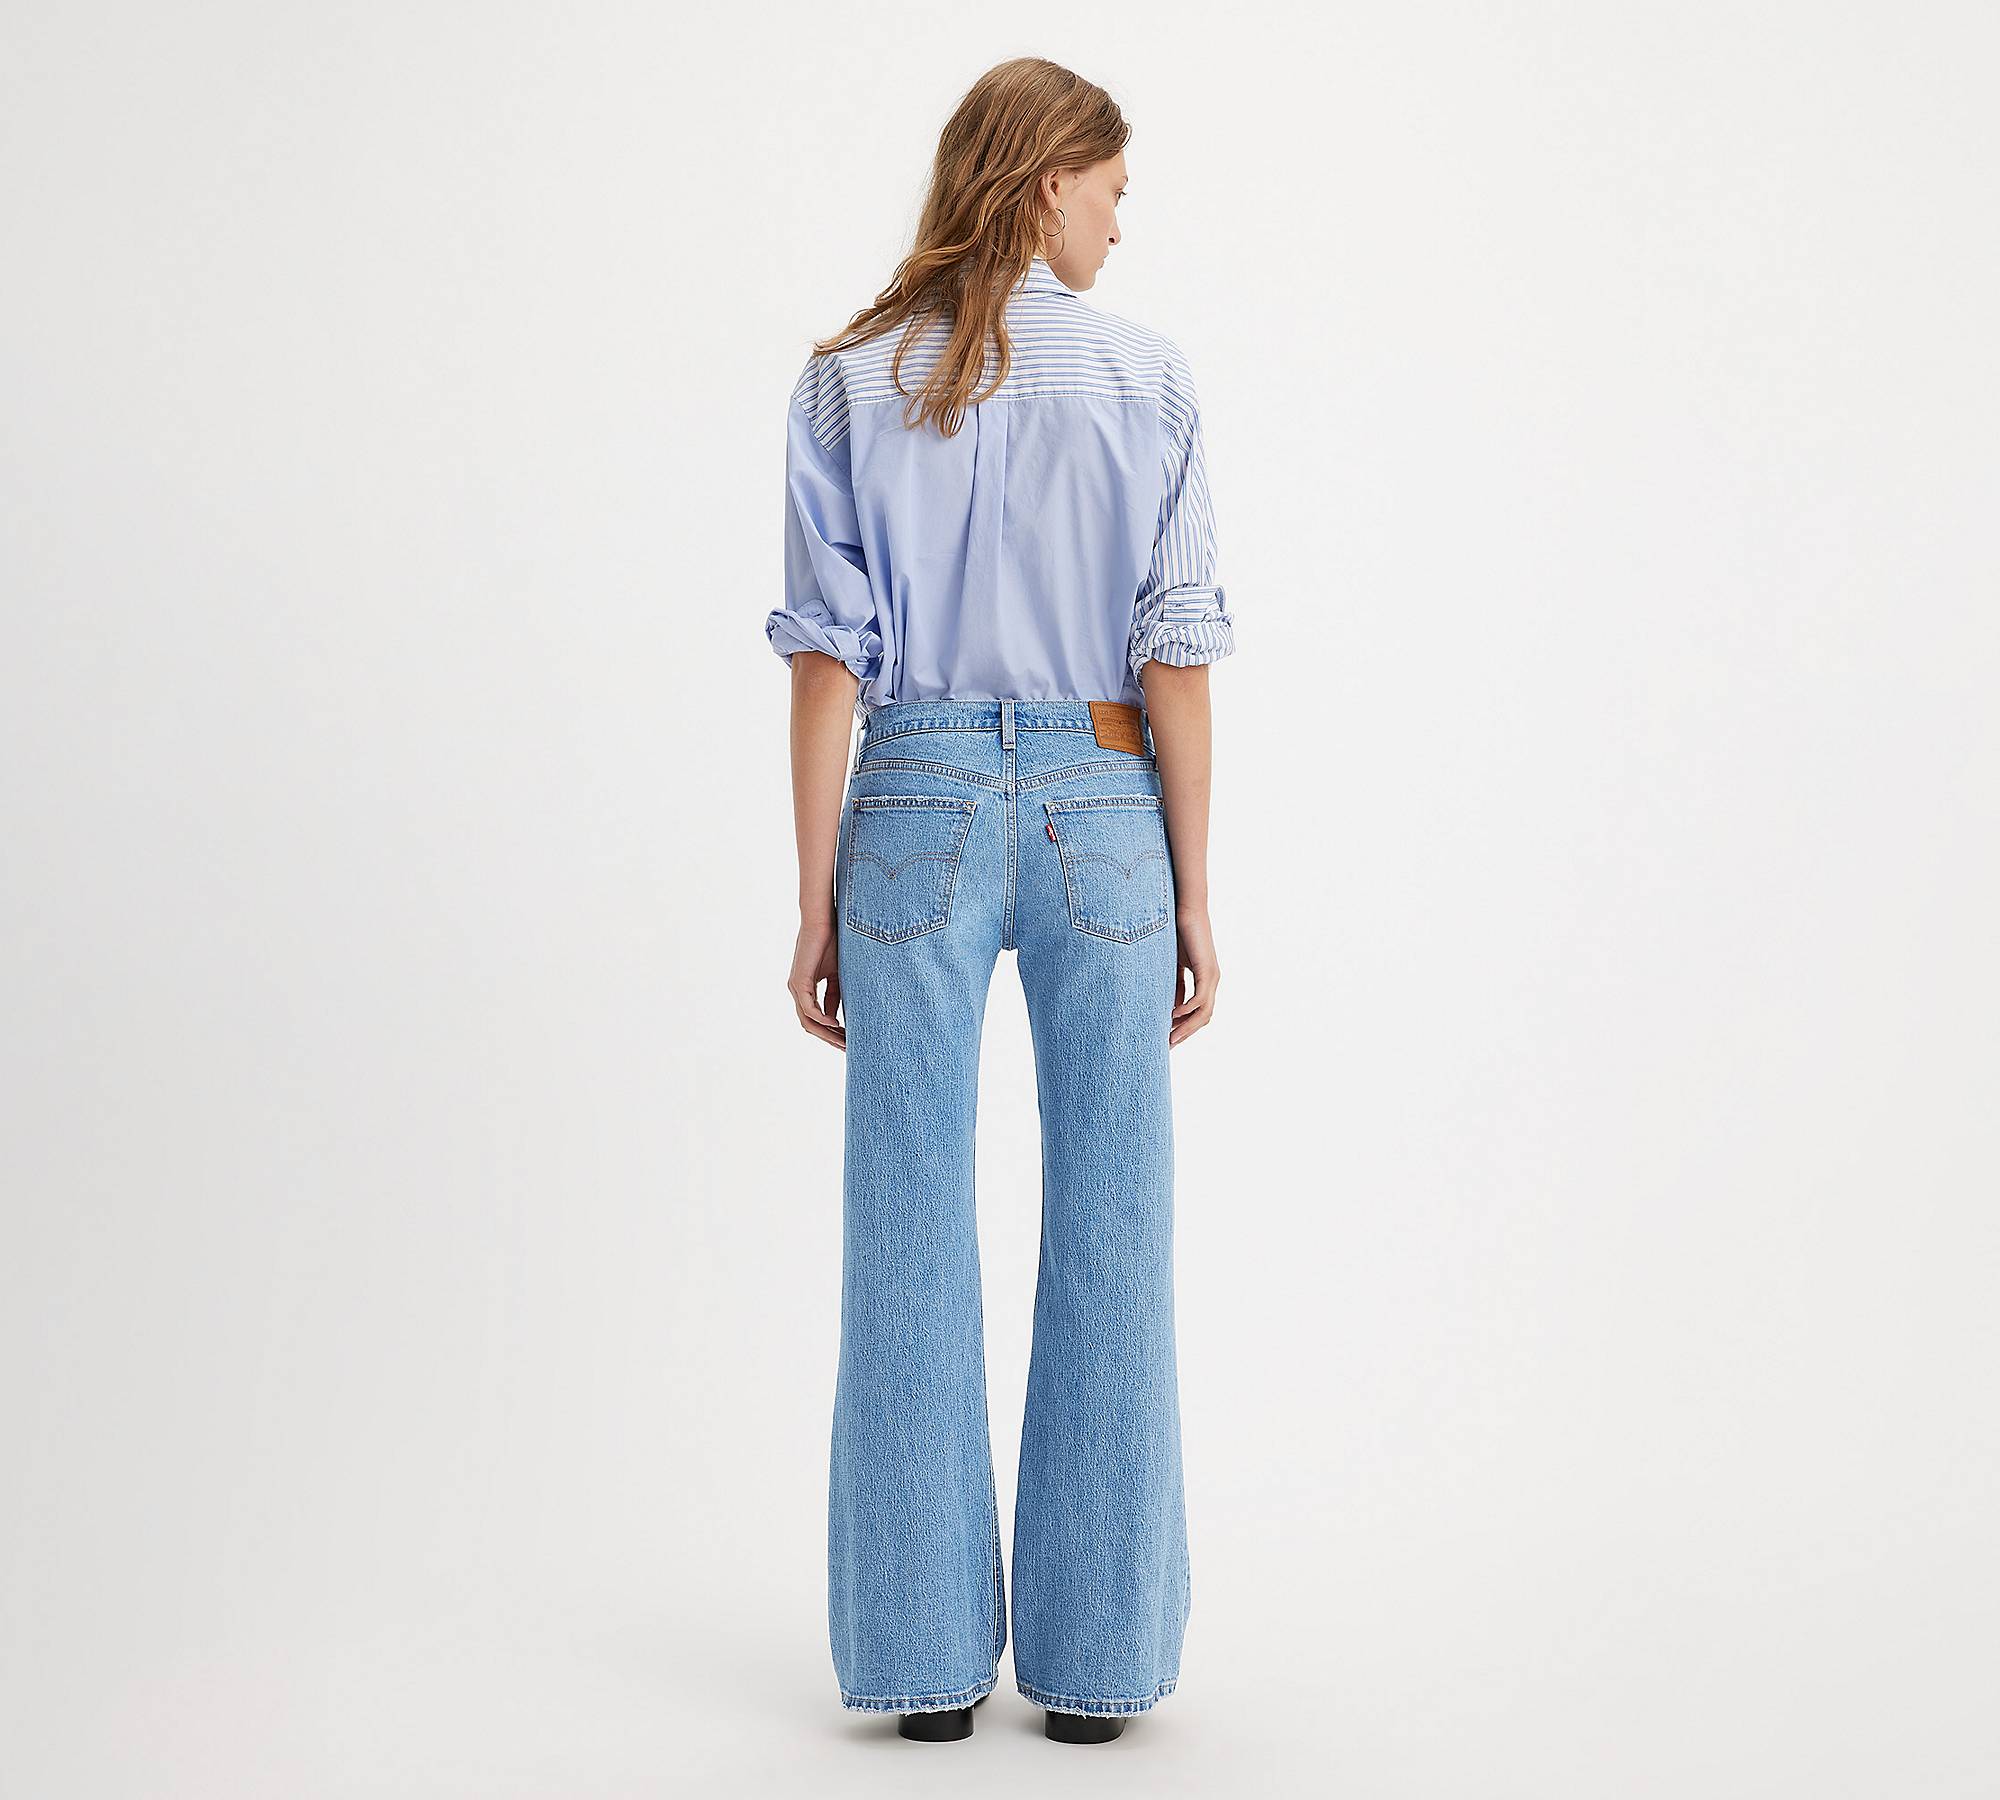 Middy Ankle Flare Women's Jeans - Medium Wash | Levi's® US